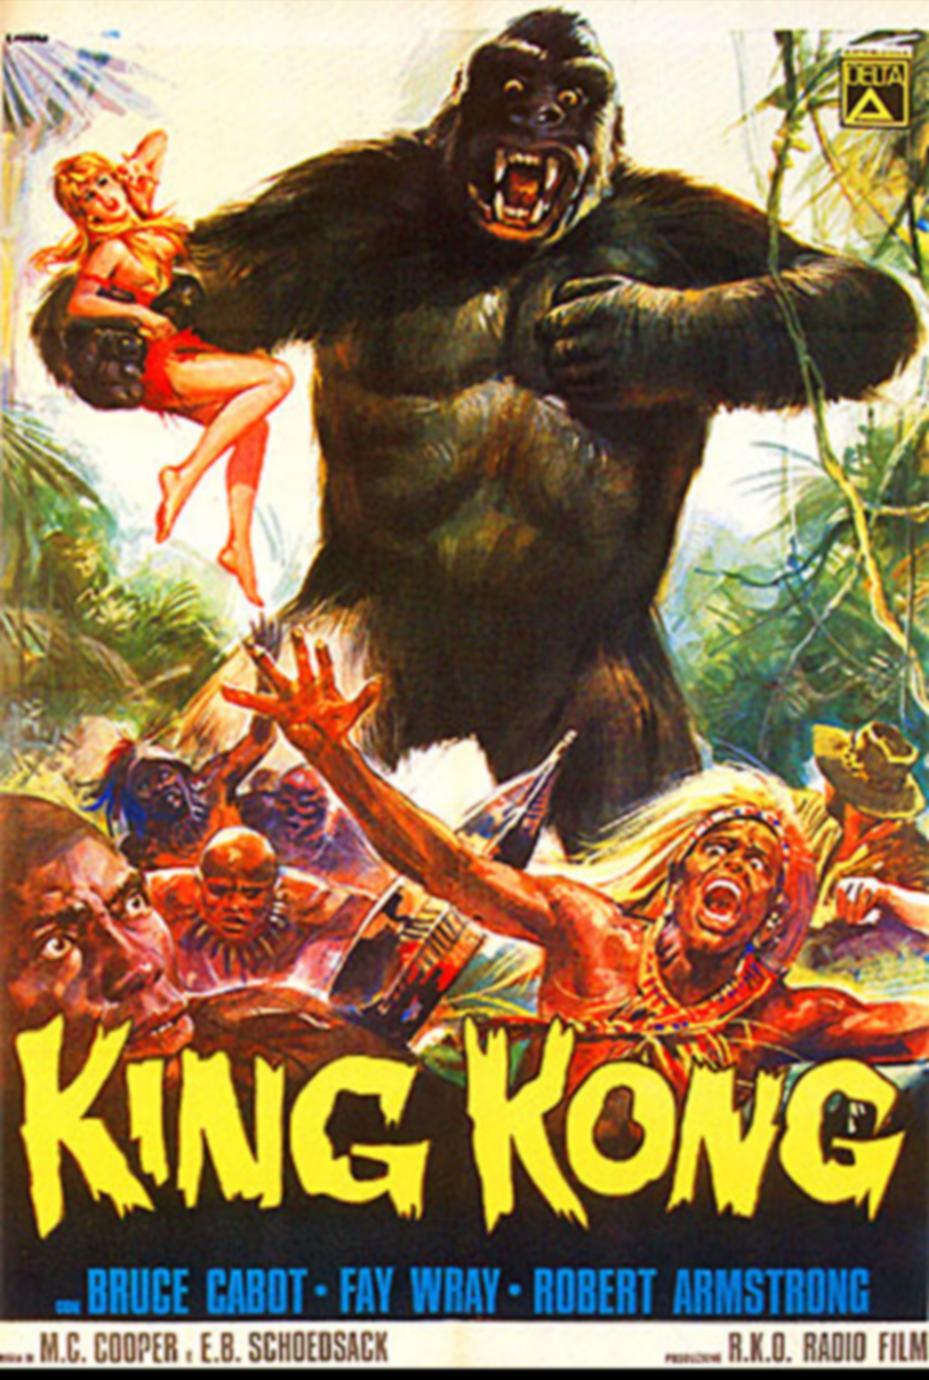 chandler fisher recommends king kong movie download pic